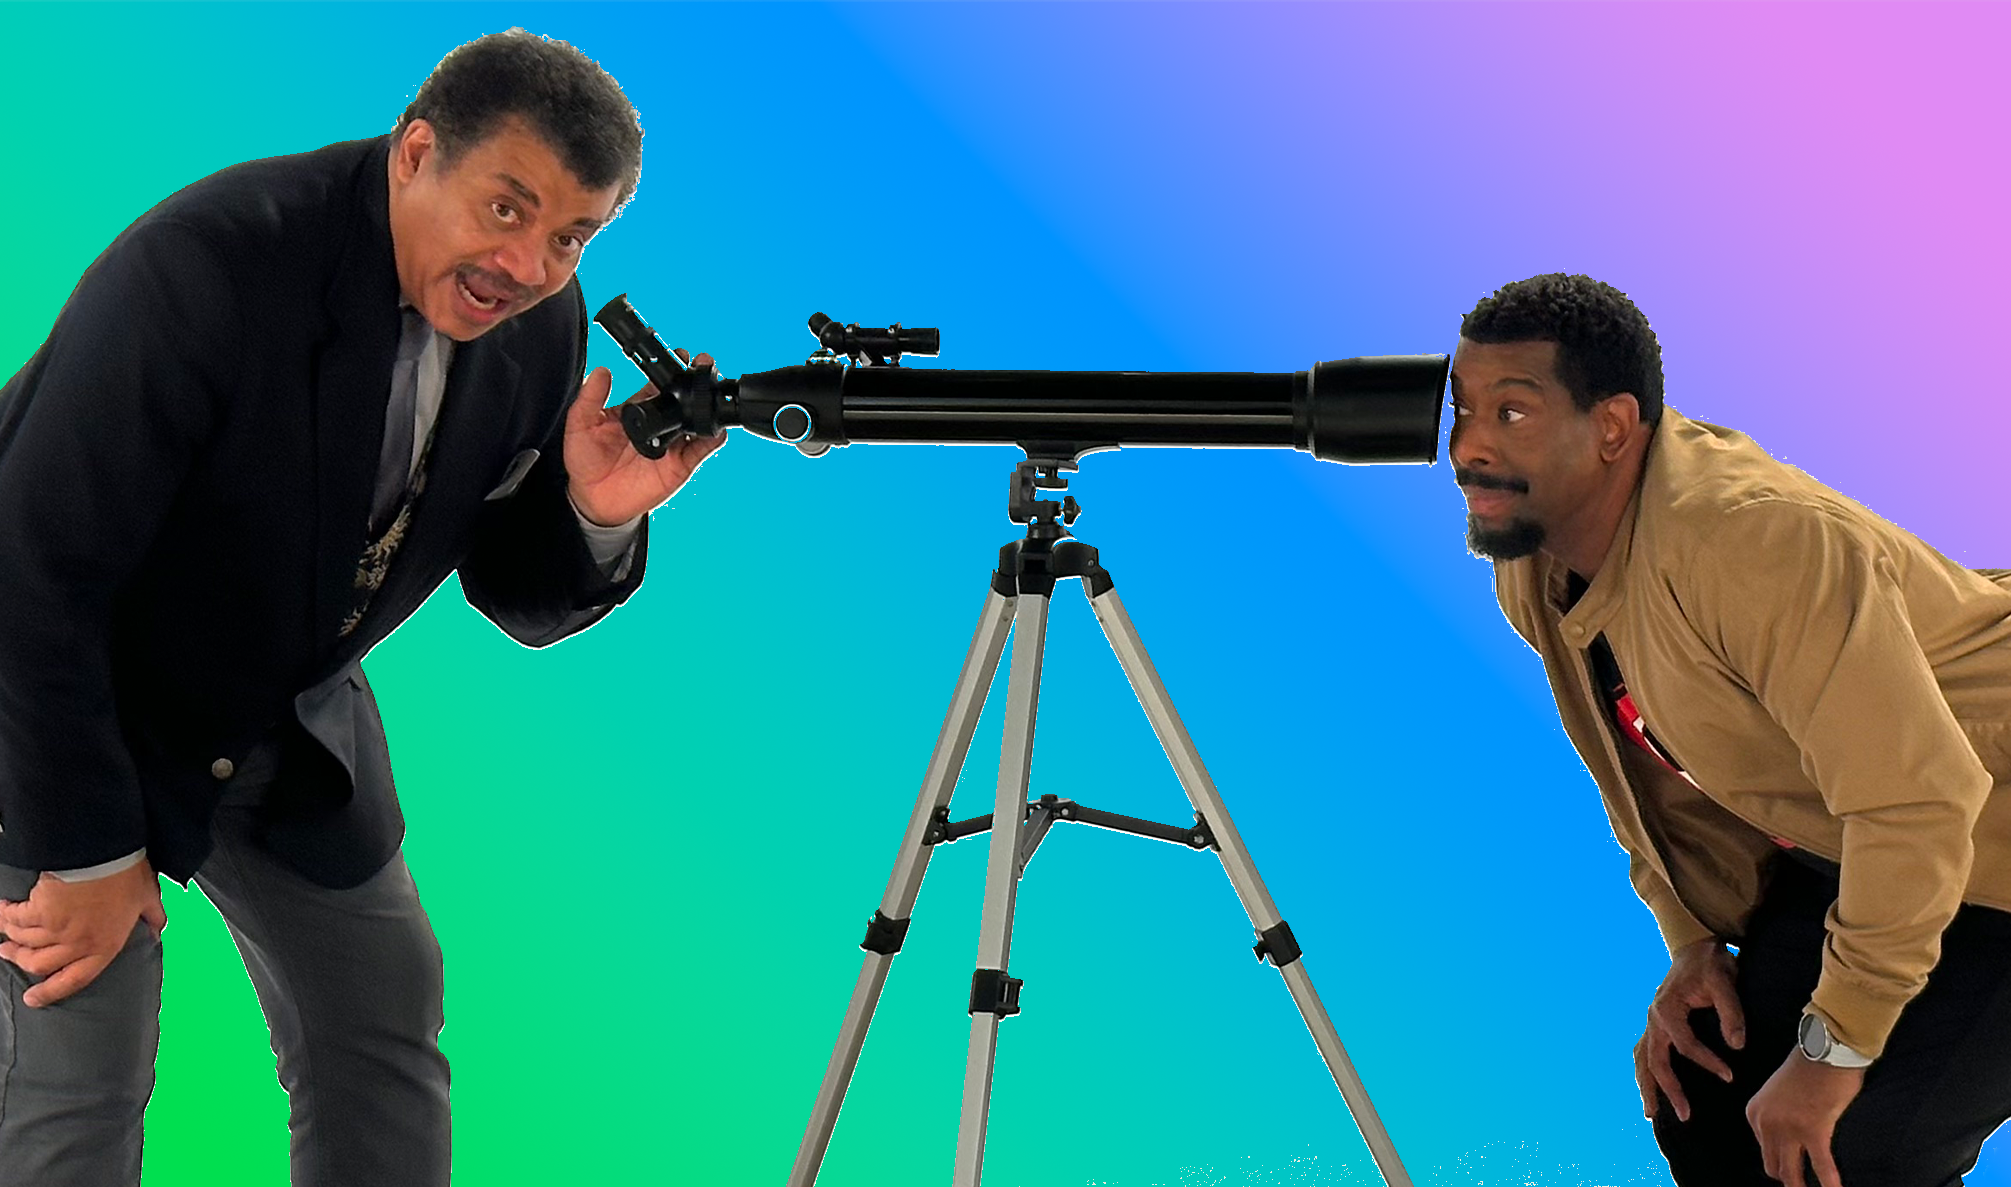 Neil deGrasse Tyson looks through a telescope as comedian Chuck Nice peers through the other side against a bright colorful background.